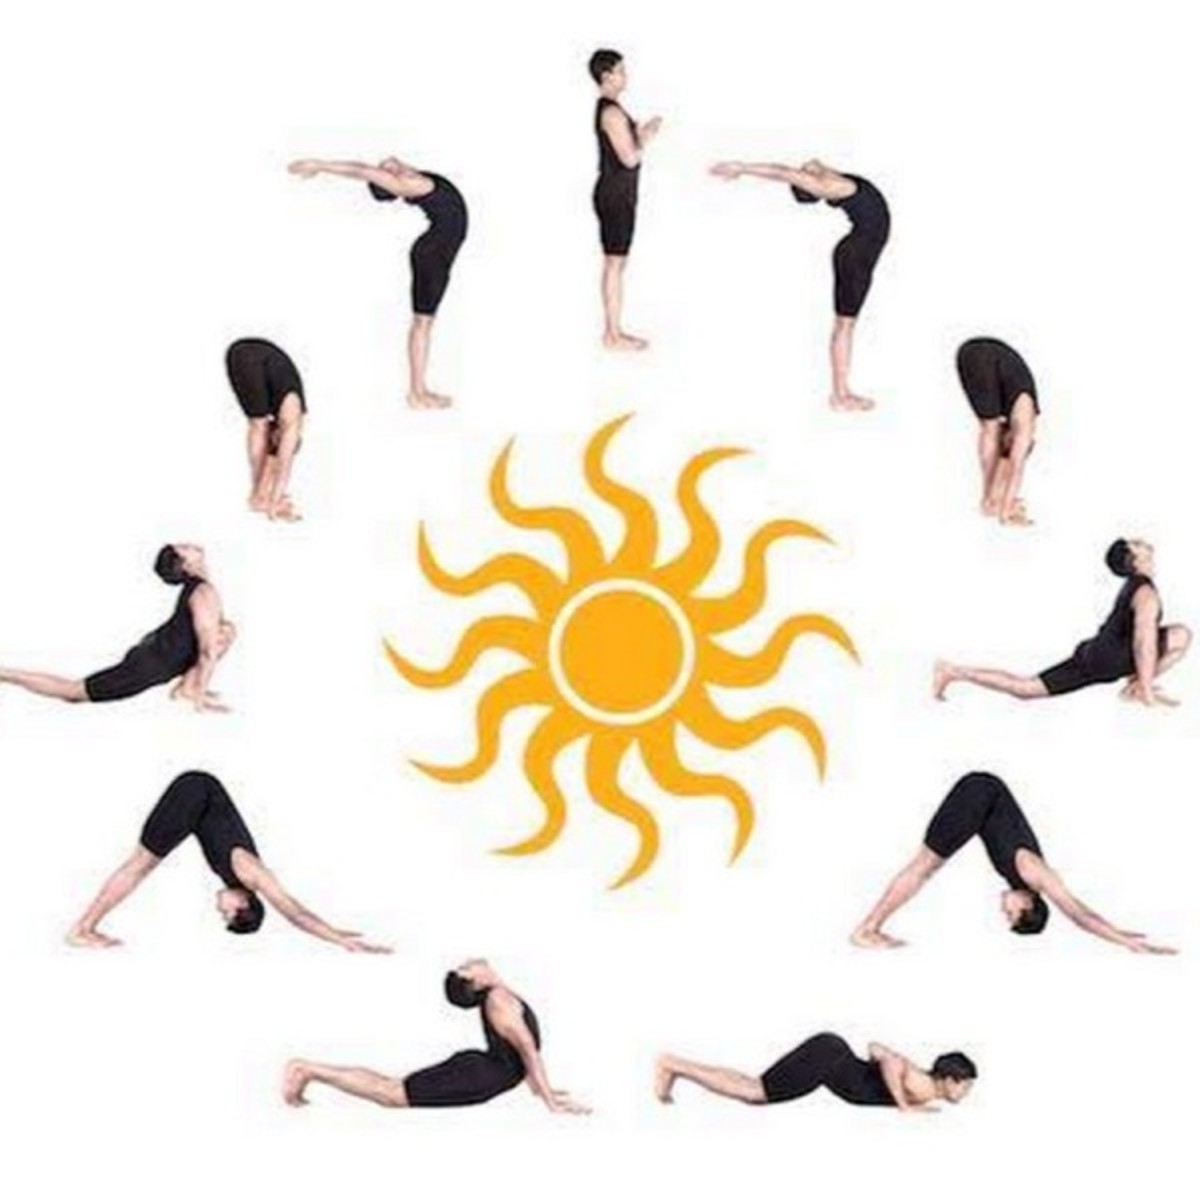 Sun Salutation - The Ultimate Full-Body Workout